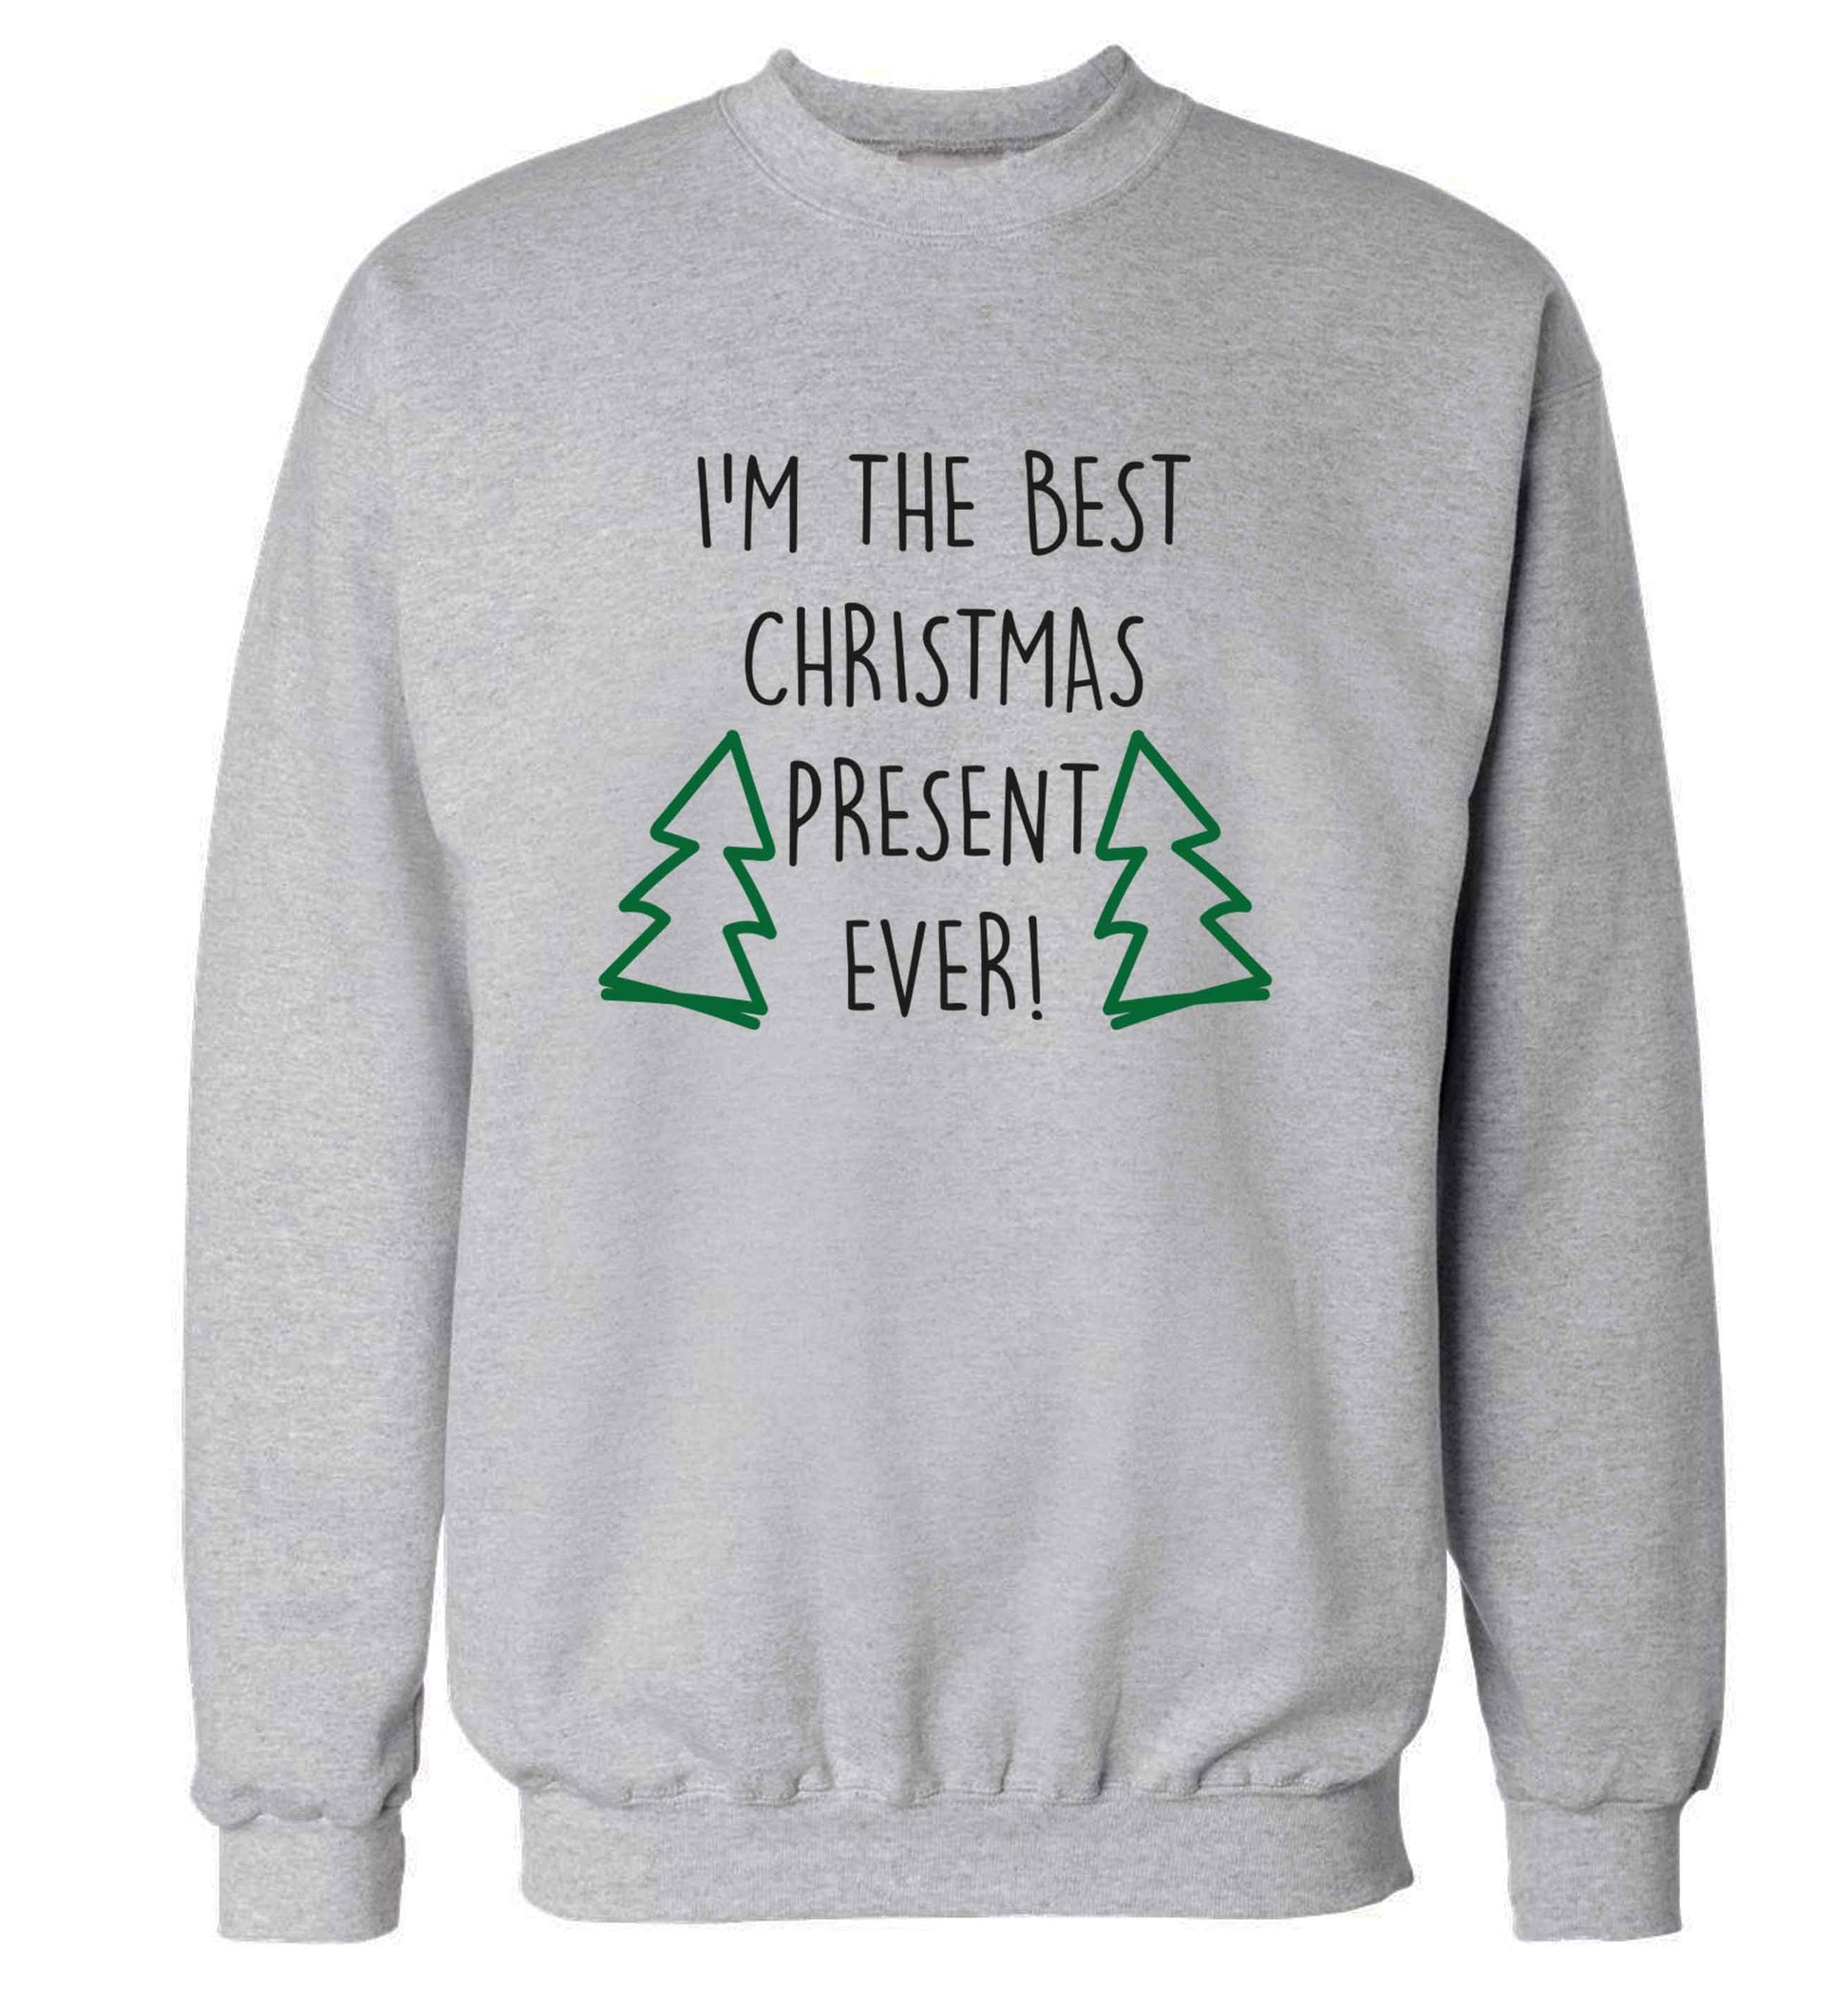 I'm the best Christmas present ever adult's unisex grey sweater 2XL